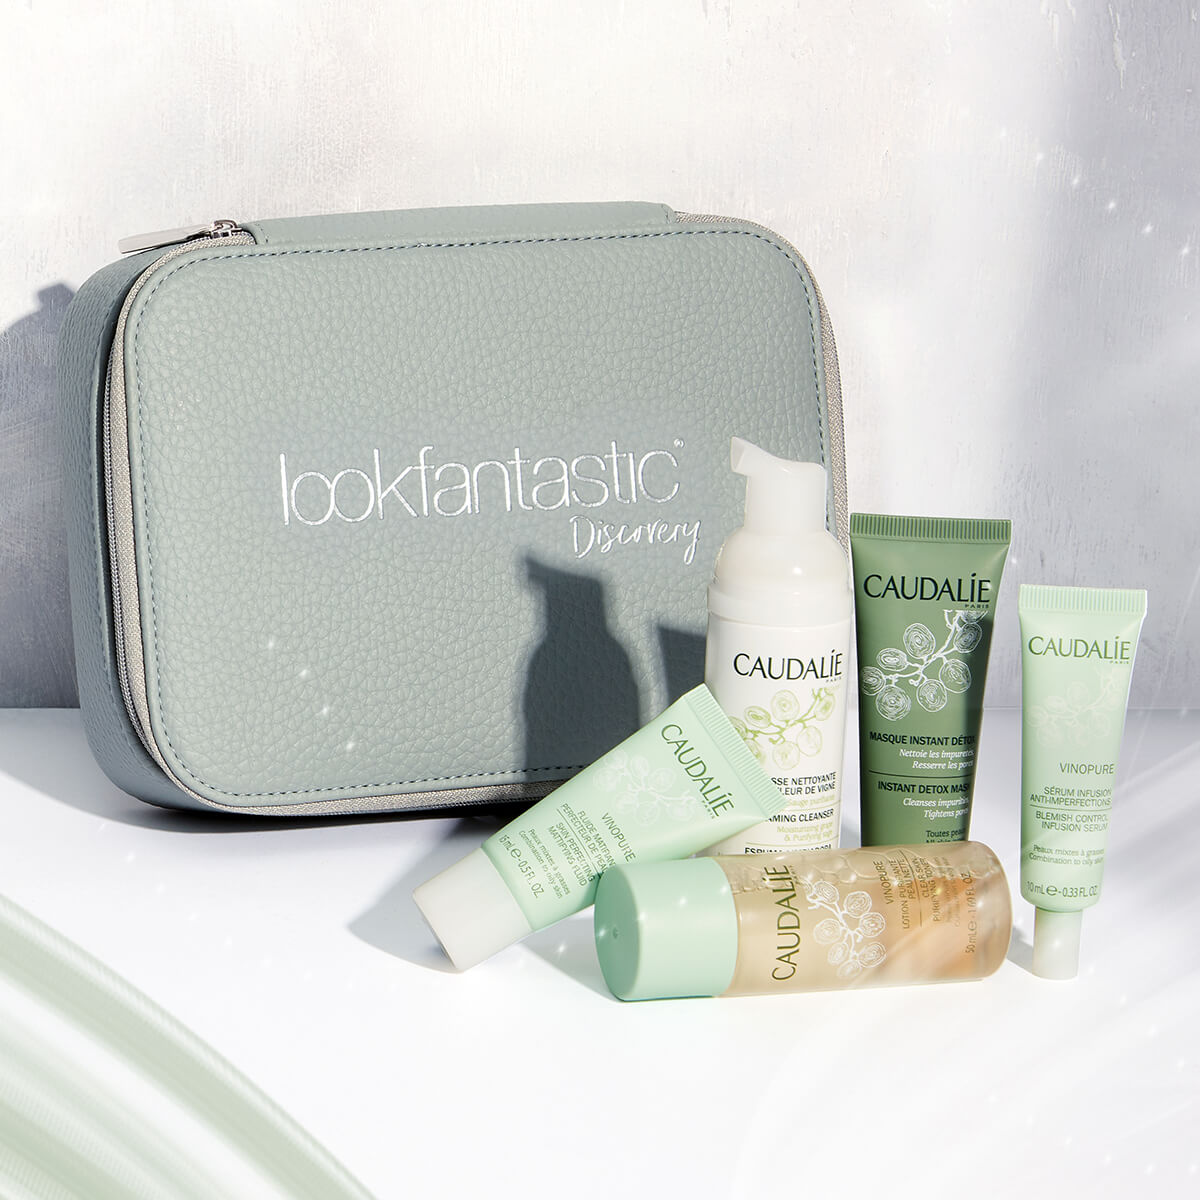 Caudalie lookfantastic Discovery Bag (Worth over £33)